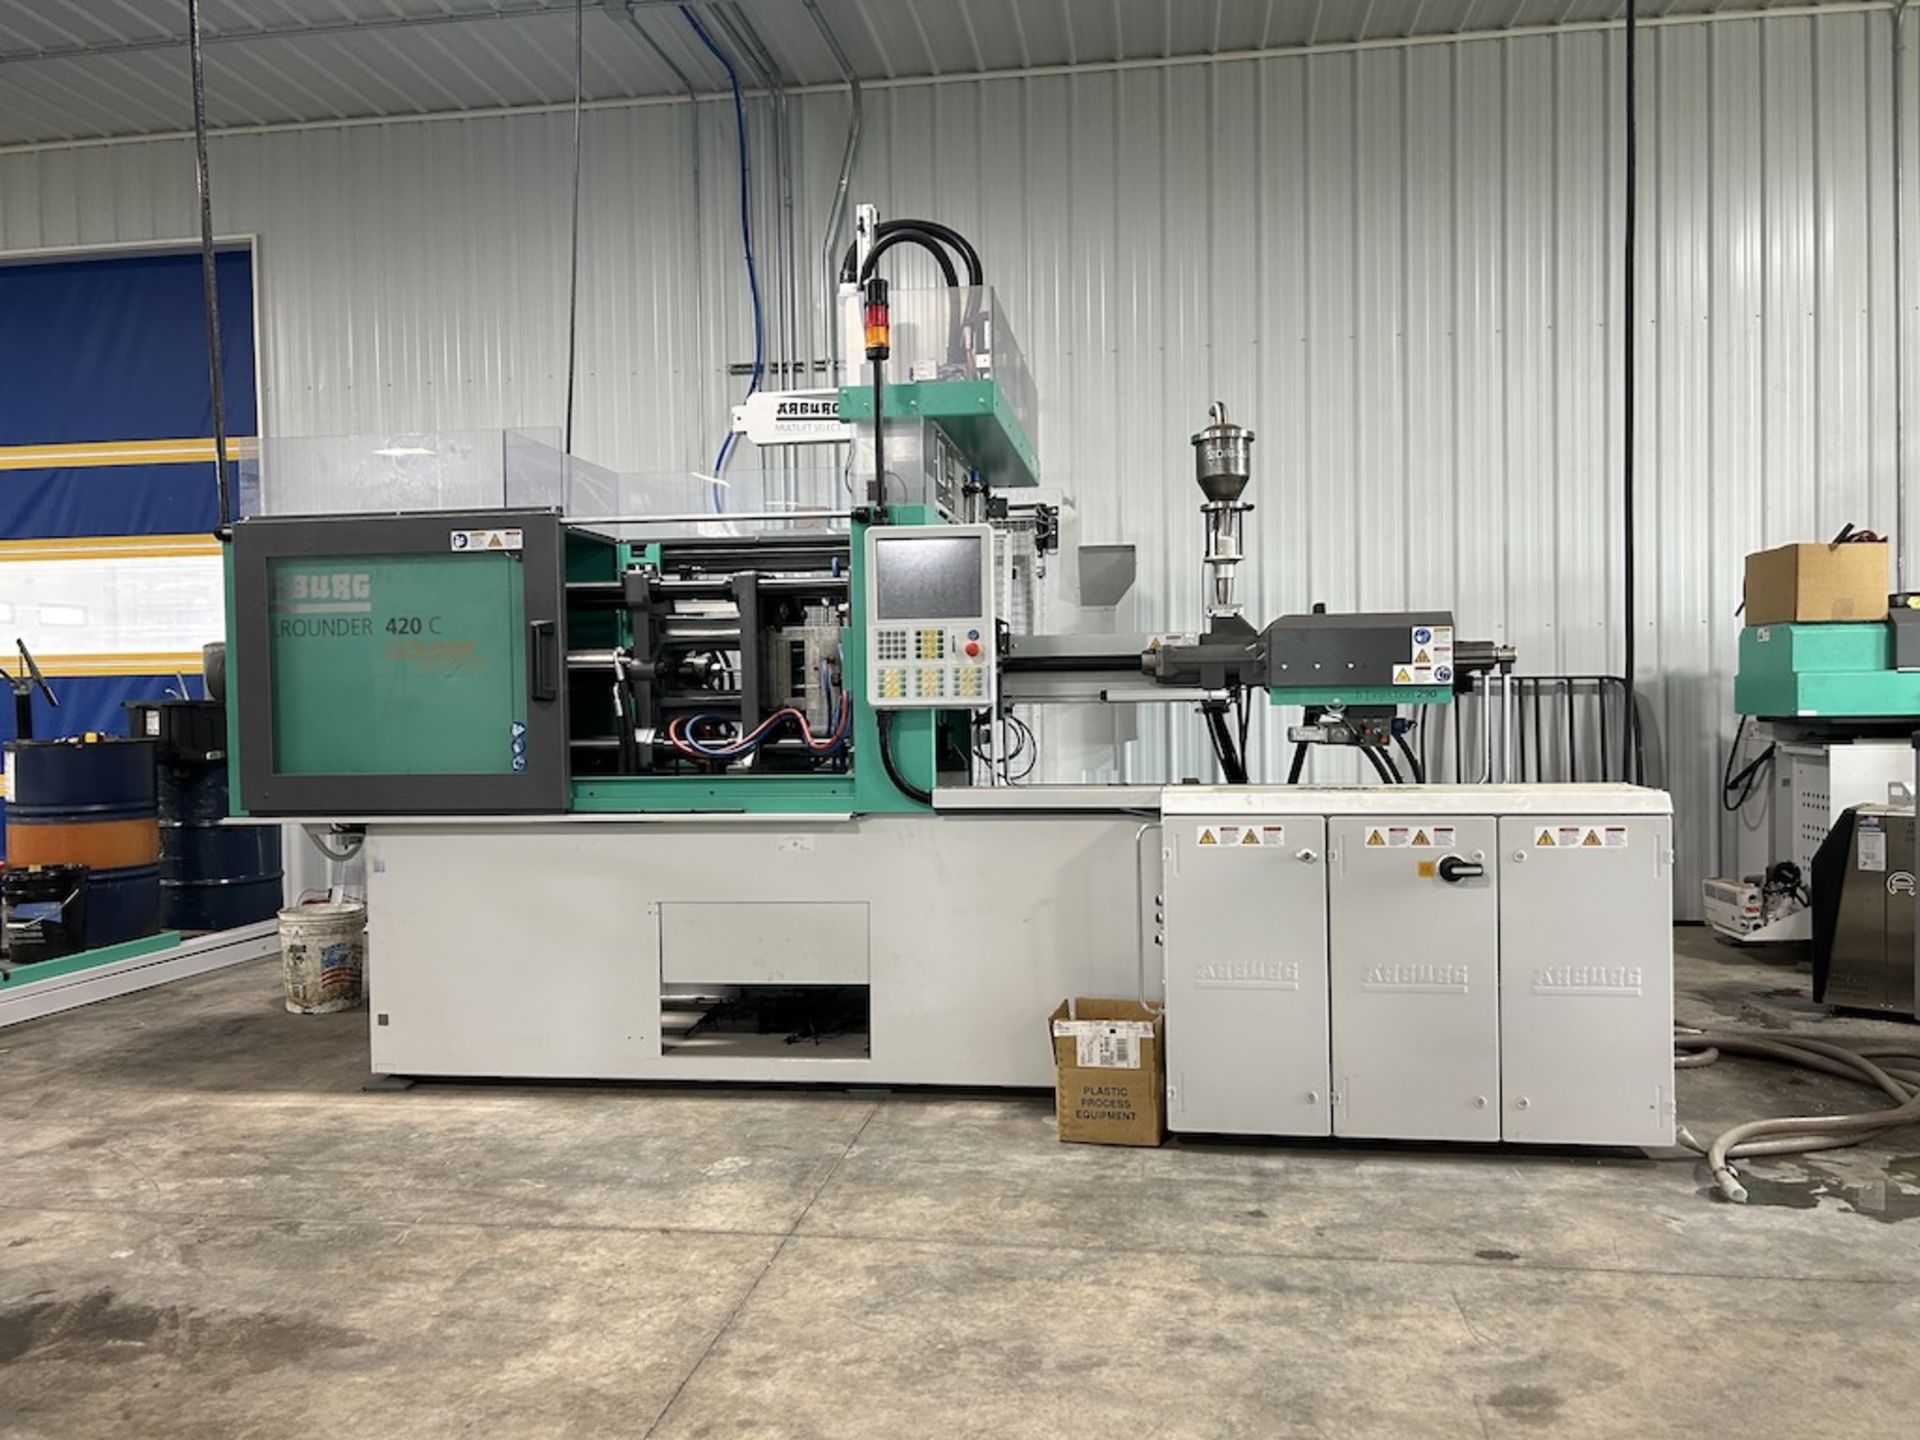 Arburg Allrounder 420C 1000-290 100 Ton Injection Molding Press, w/Robot, New in 2021